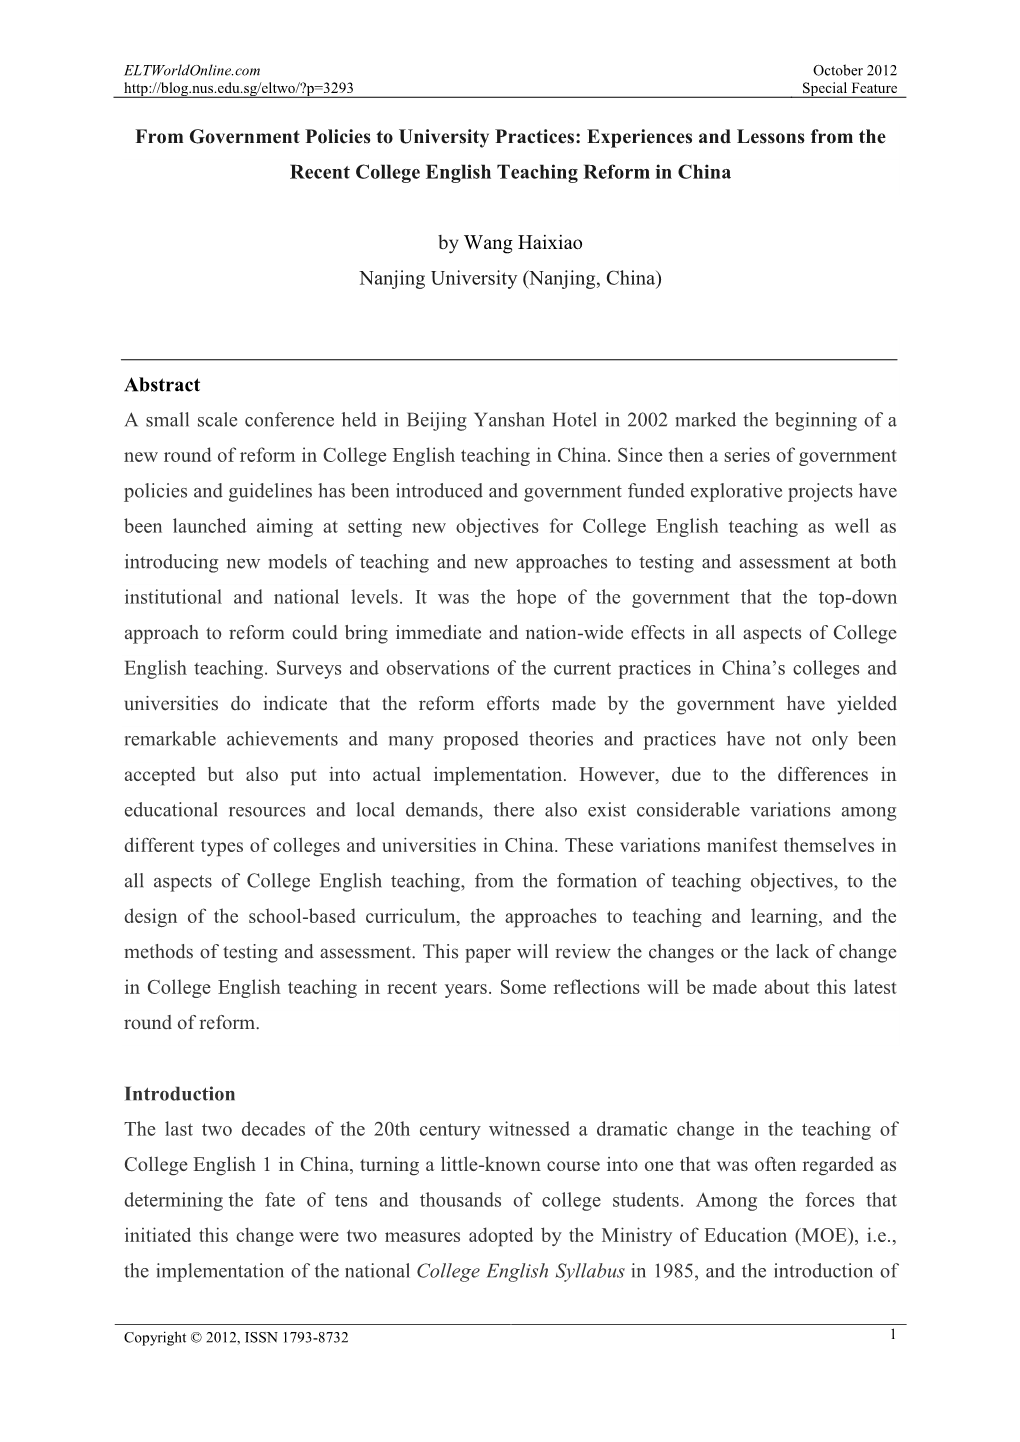 From Government Policies to University Practices: Experiences and Lessons from the Recent College English Teaching Reform in China